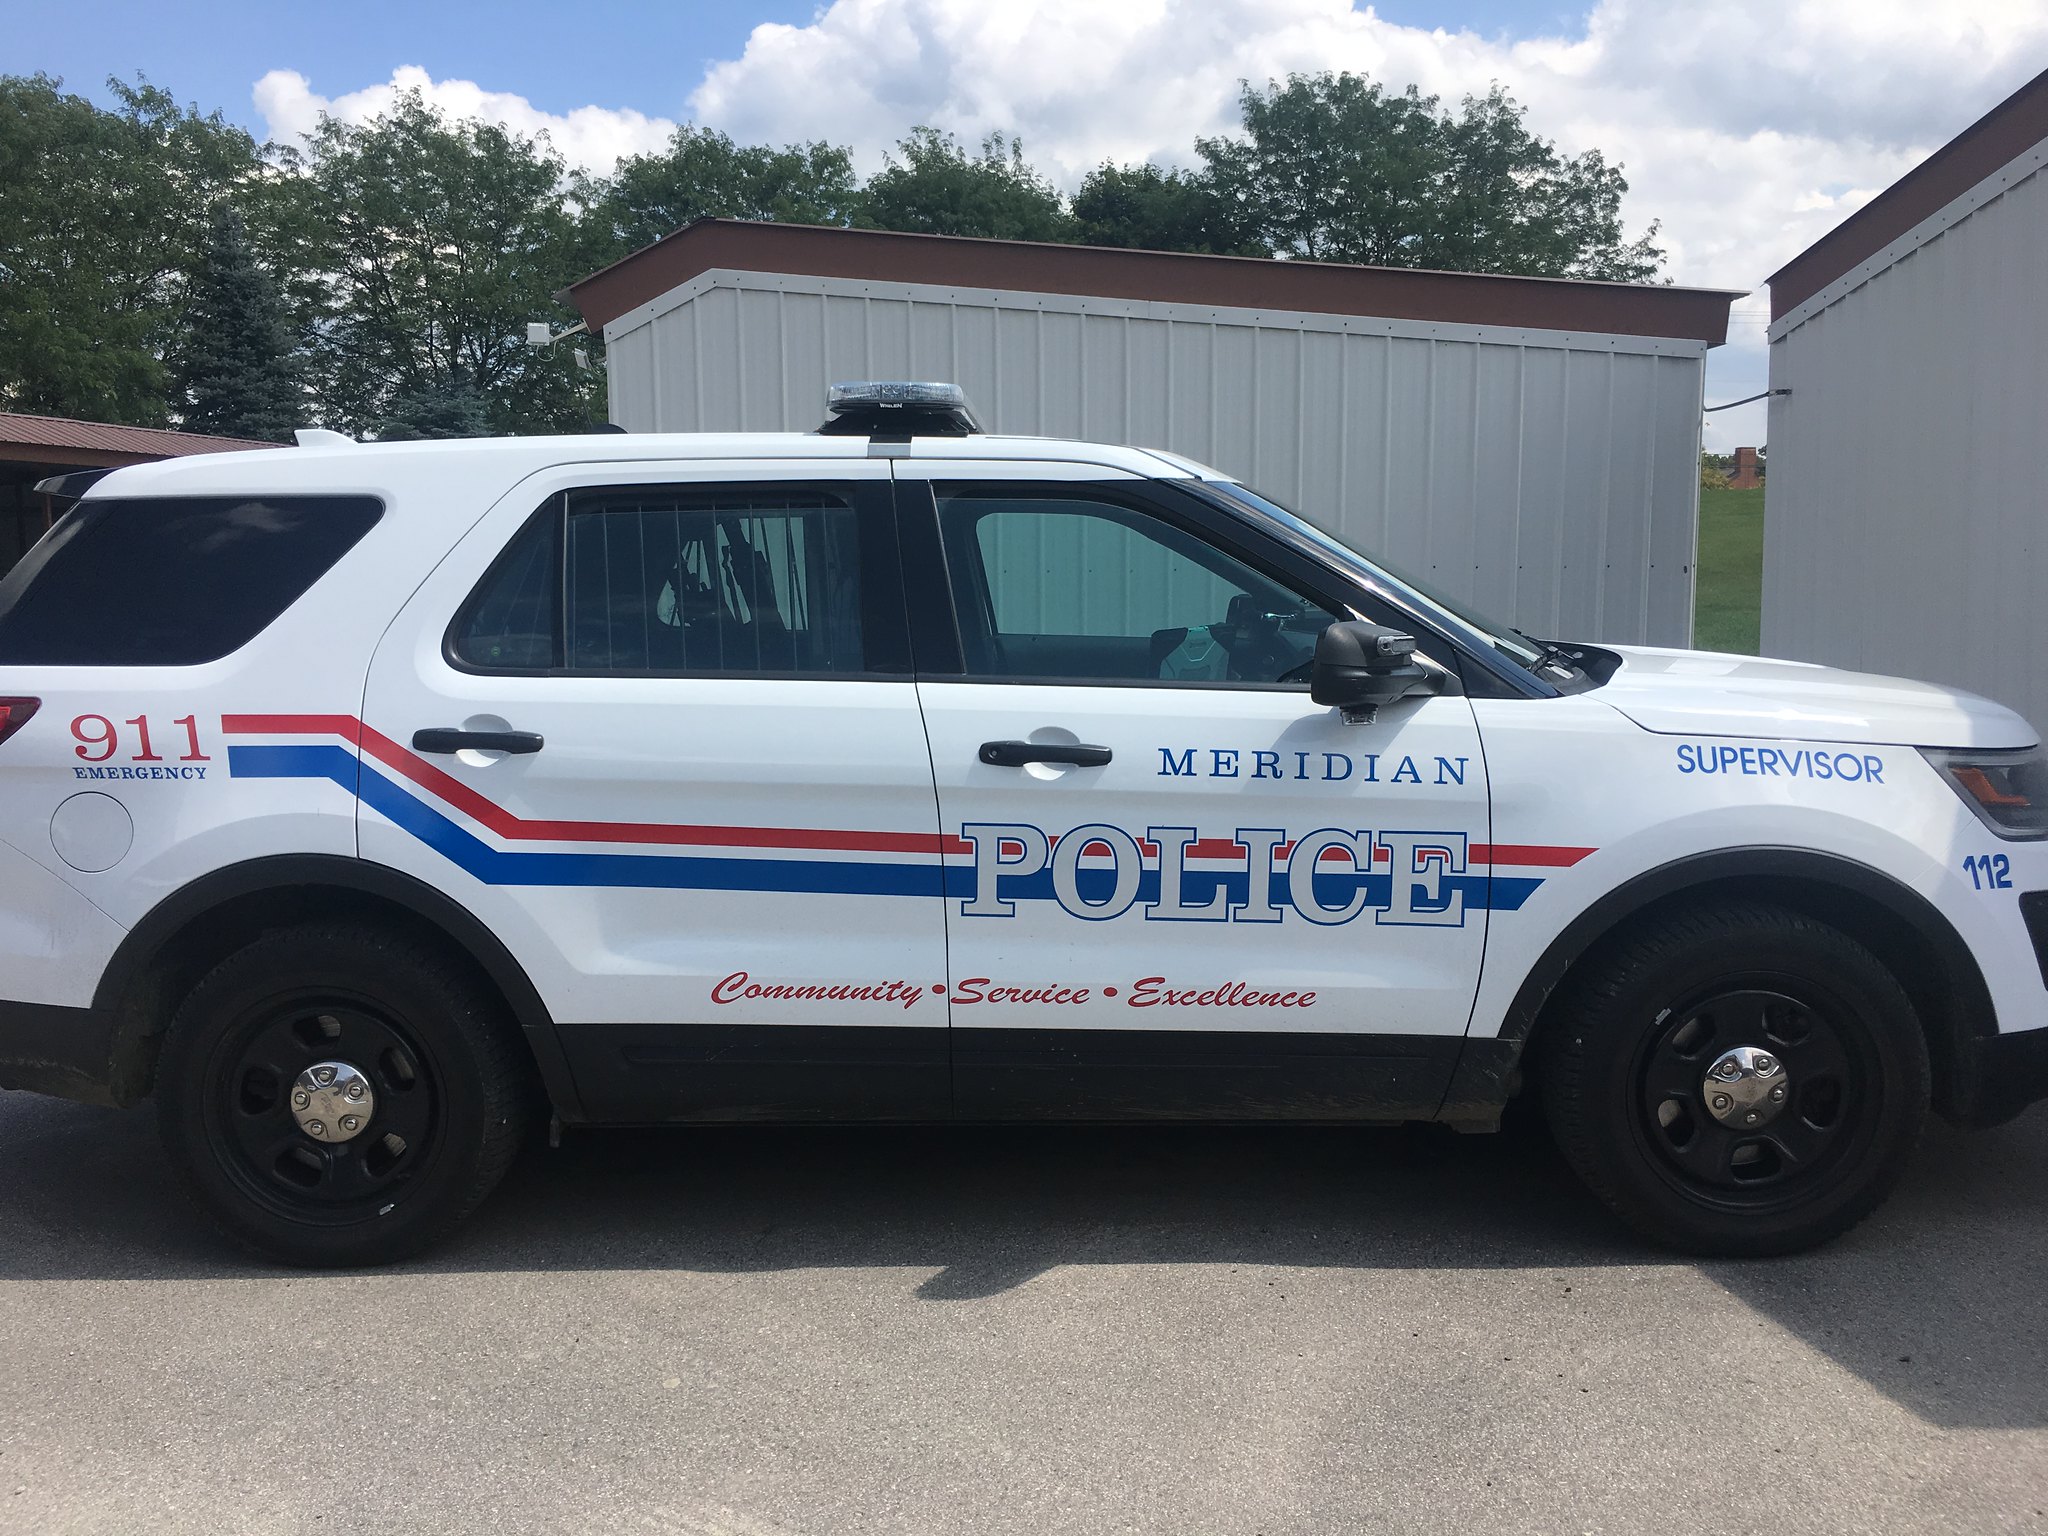 Gun Safety in Schools Is Important To Meridian Township's Police Department 